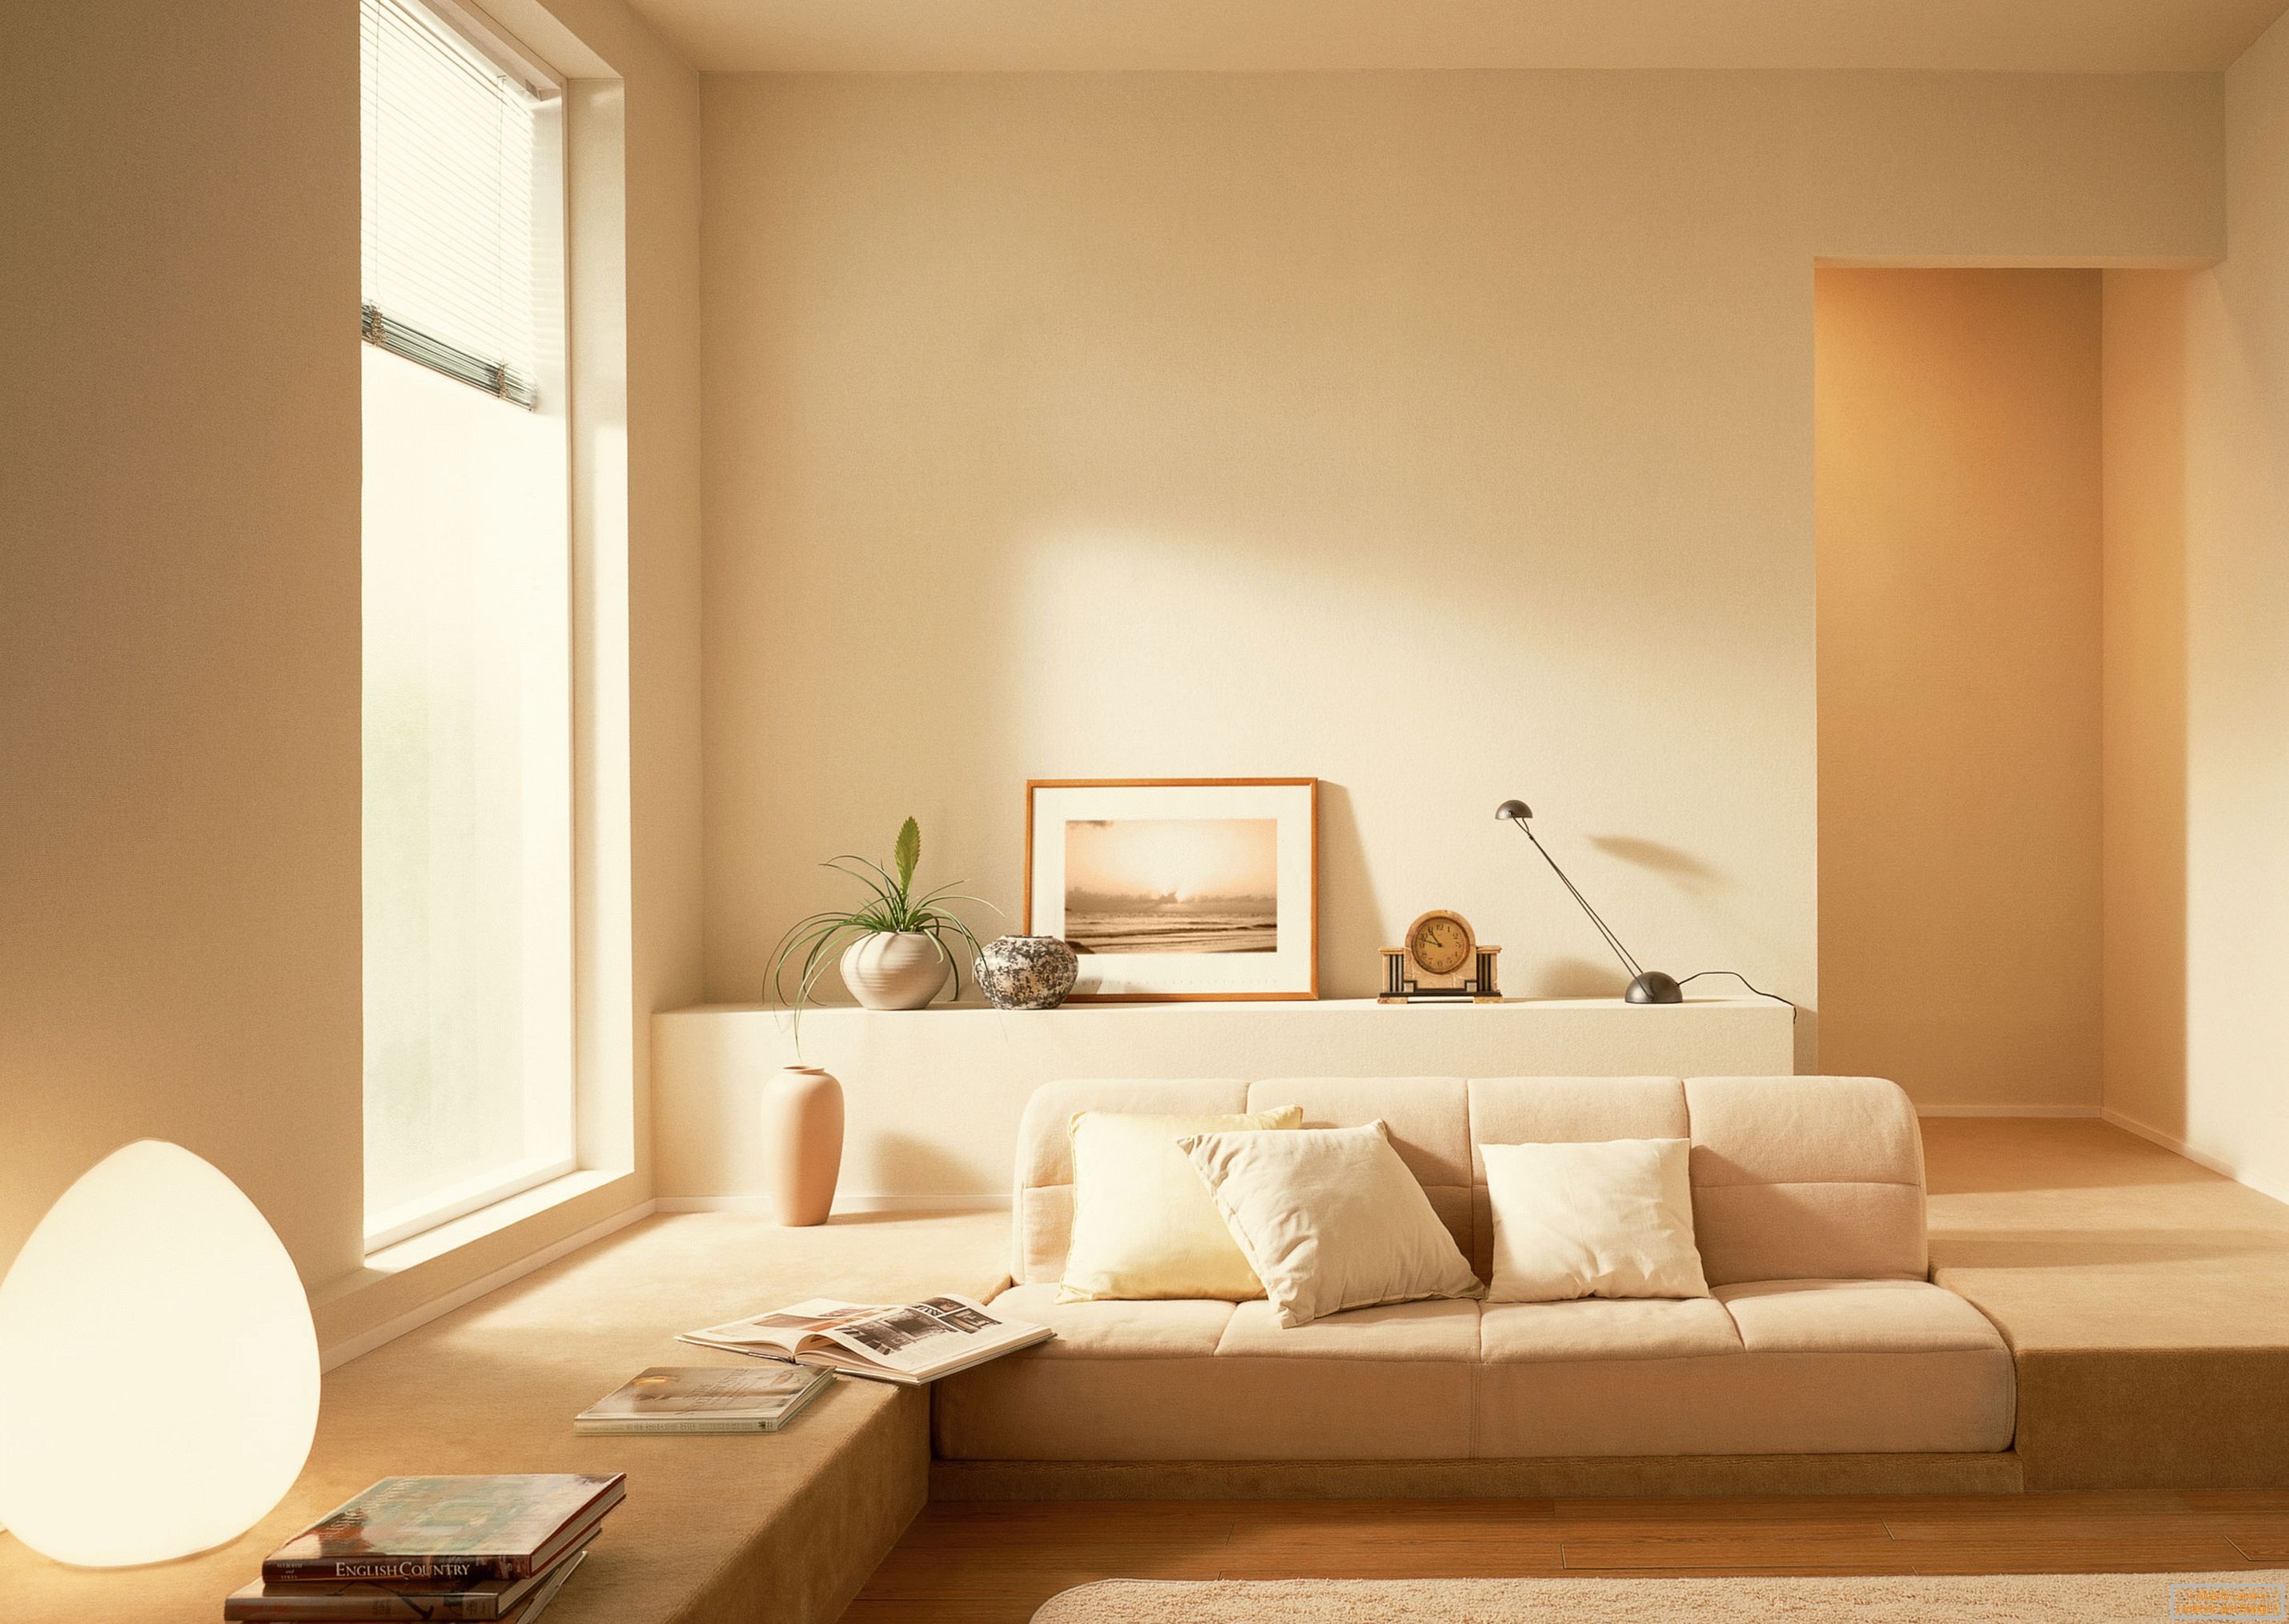 In accordance with the style of minimalism, a calm beige shade was used to organize the interior of the living room.